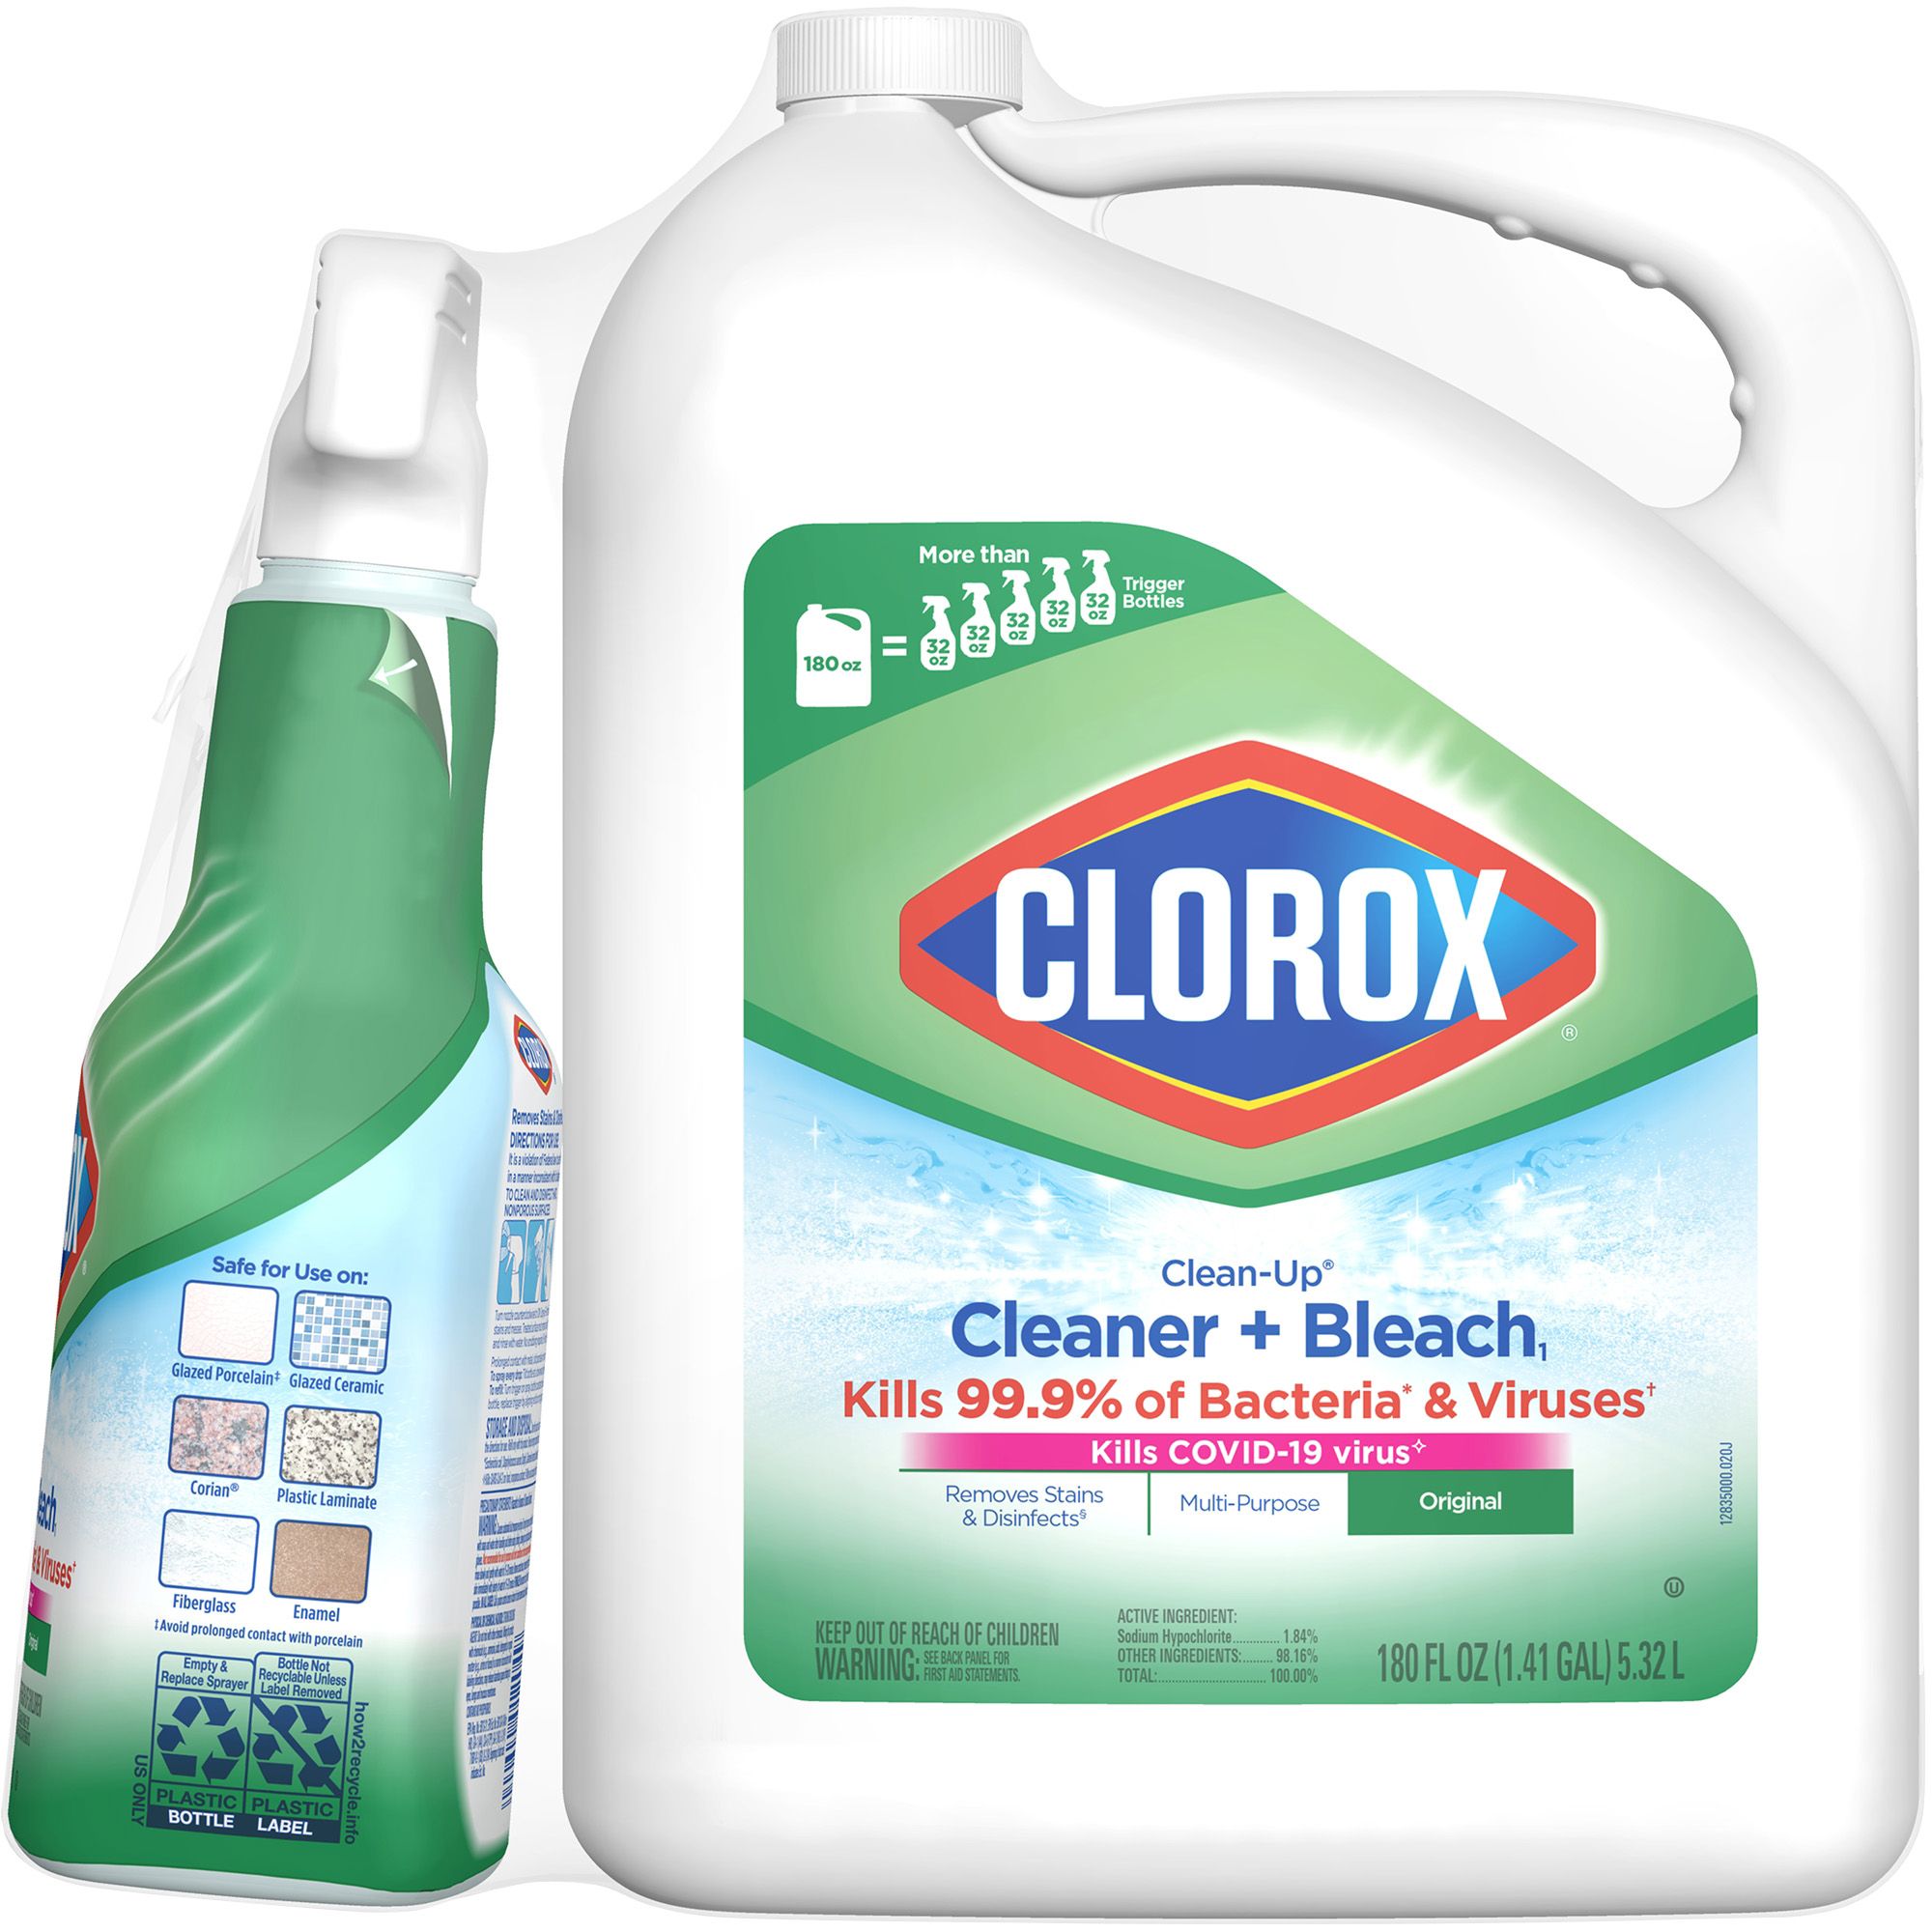 Clorox Clean-Up Cleaner with Bleach Spray Bottle, 32 oz. with Refill Bottle, 180 oz.